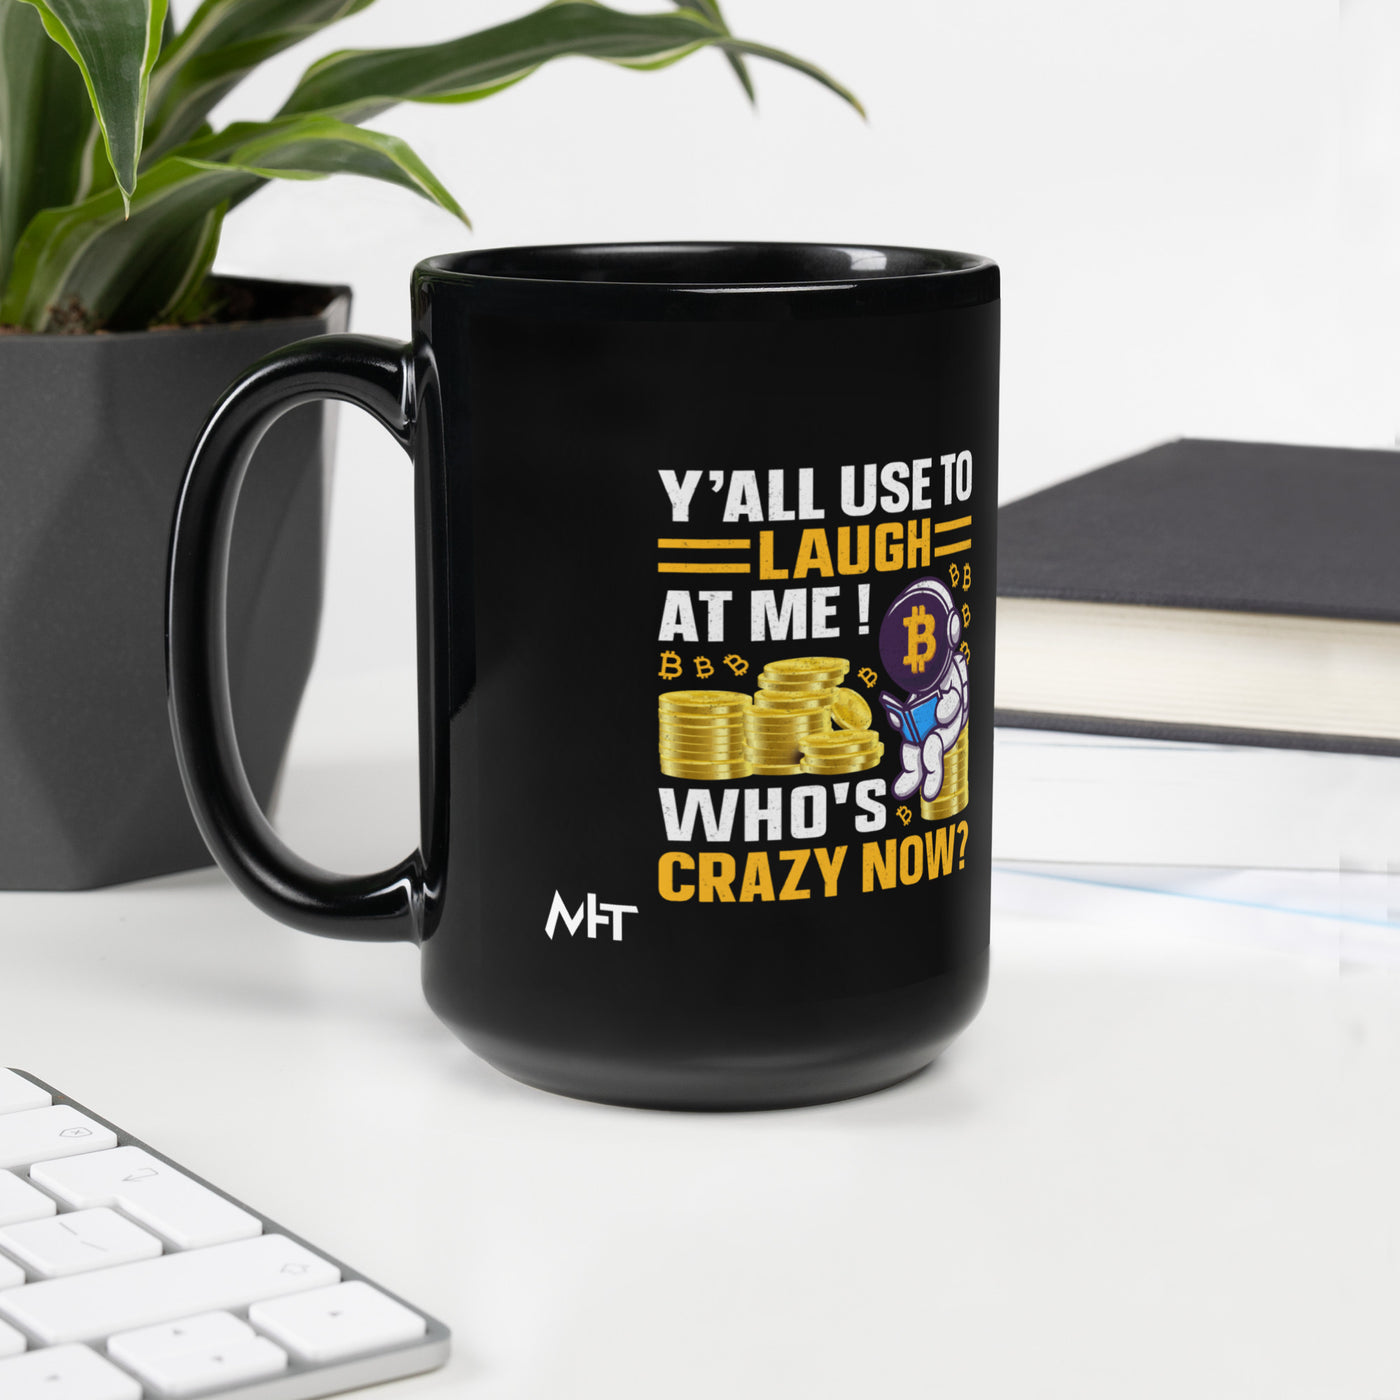 Y'all used to Laugh at Me. Who's crazy, now? - Black Glossy Mug